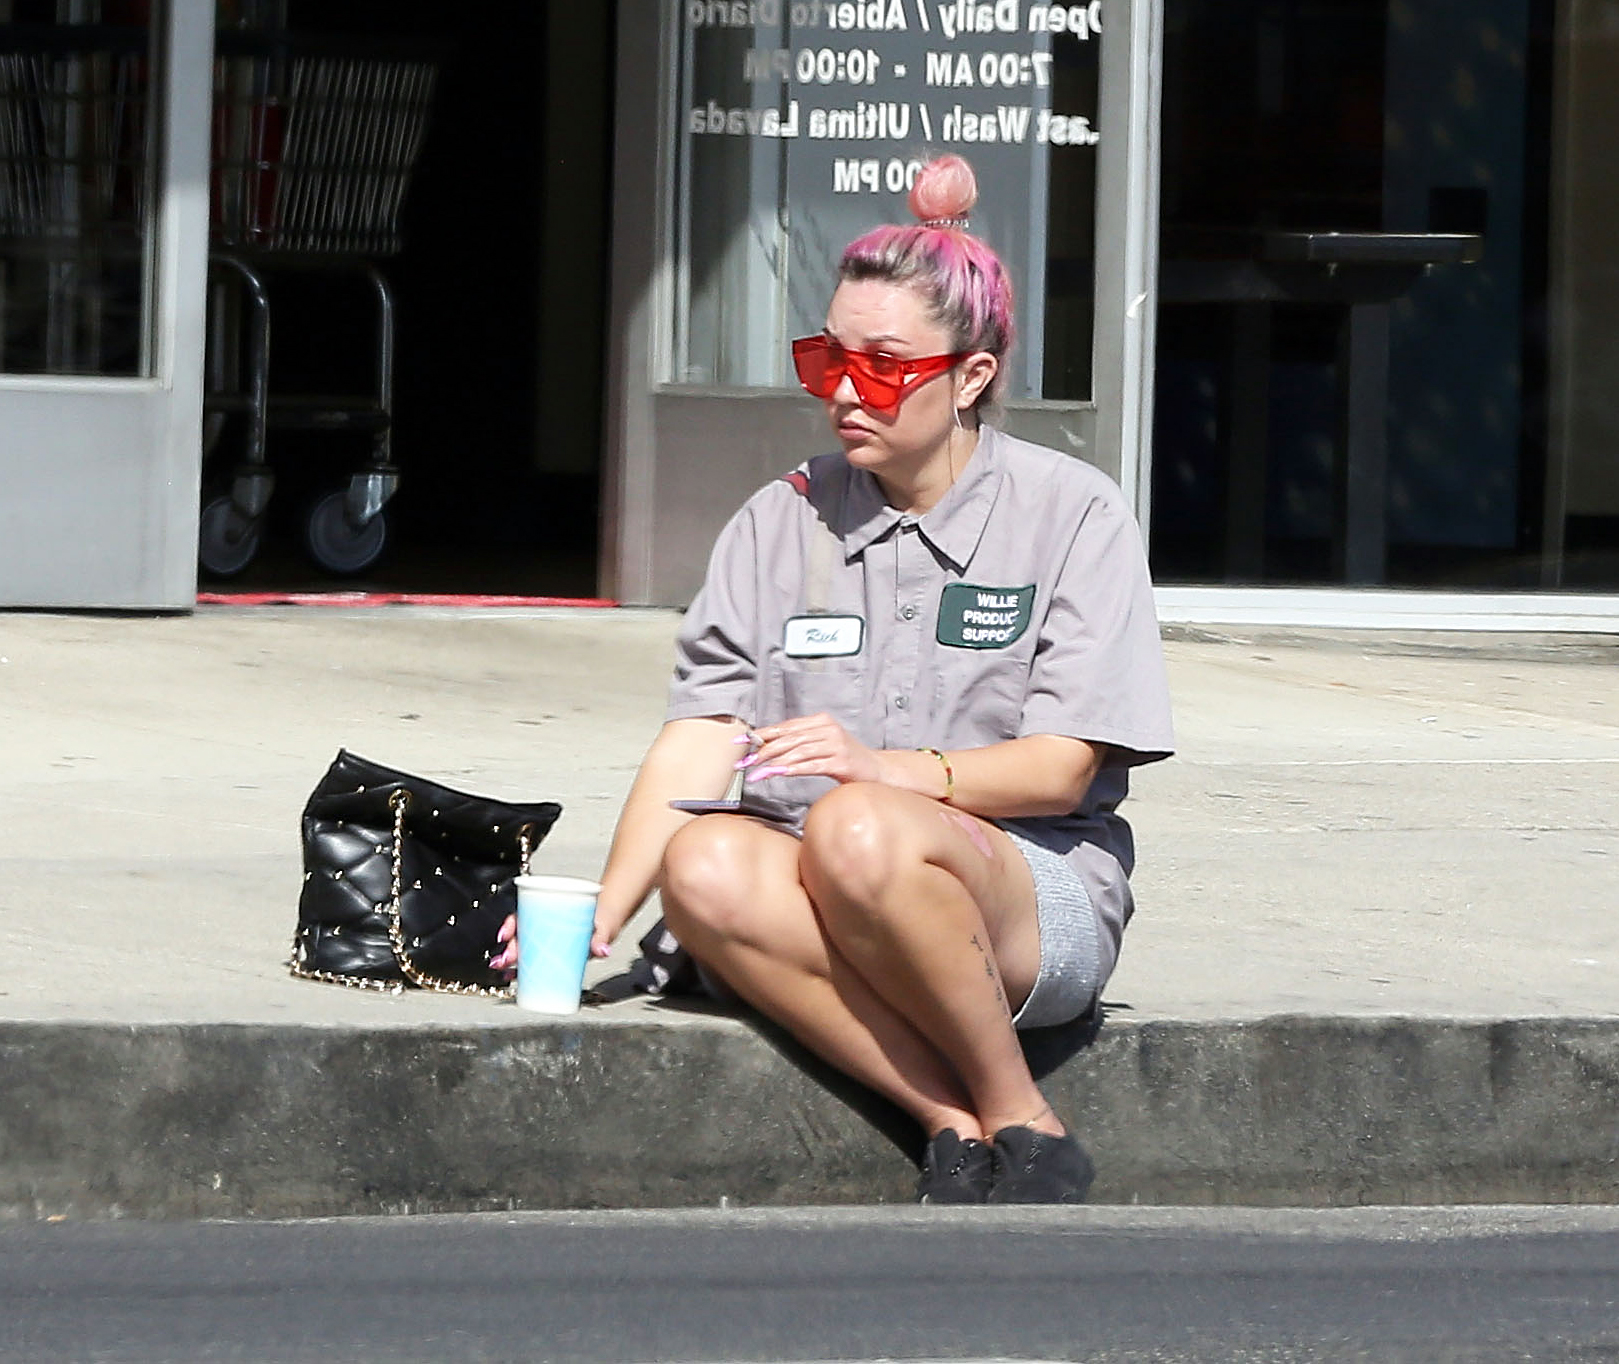 Amanda Bynes Seen With Large Injury on Her Thigh Leaving Nail Salon